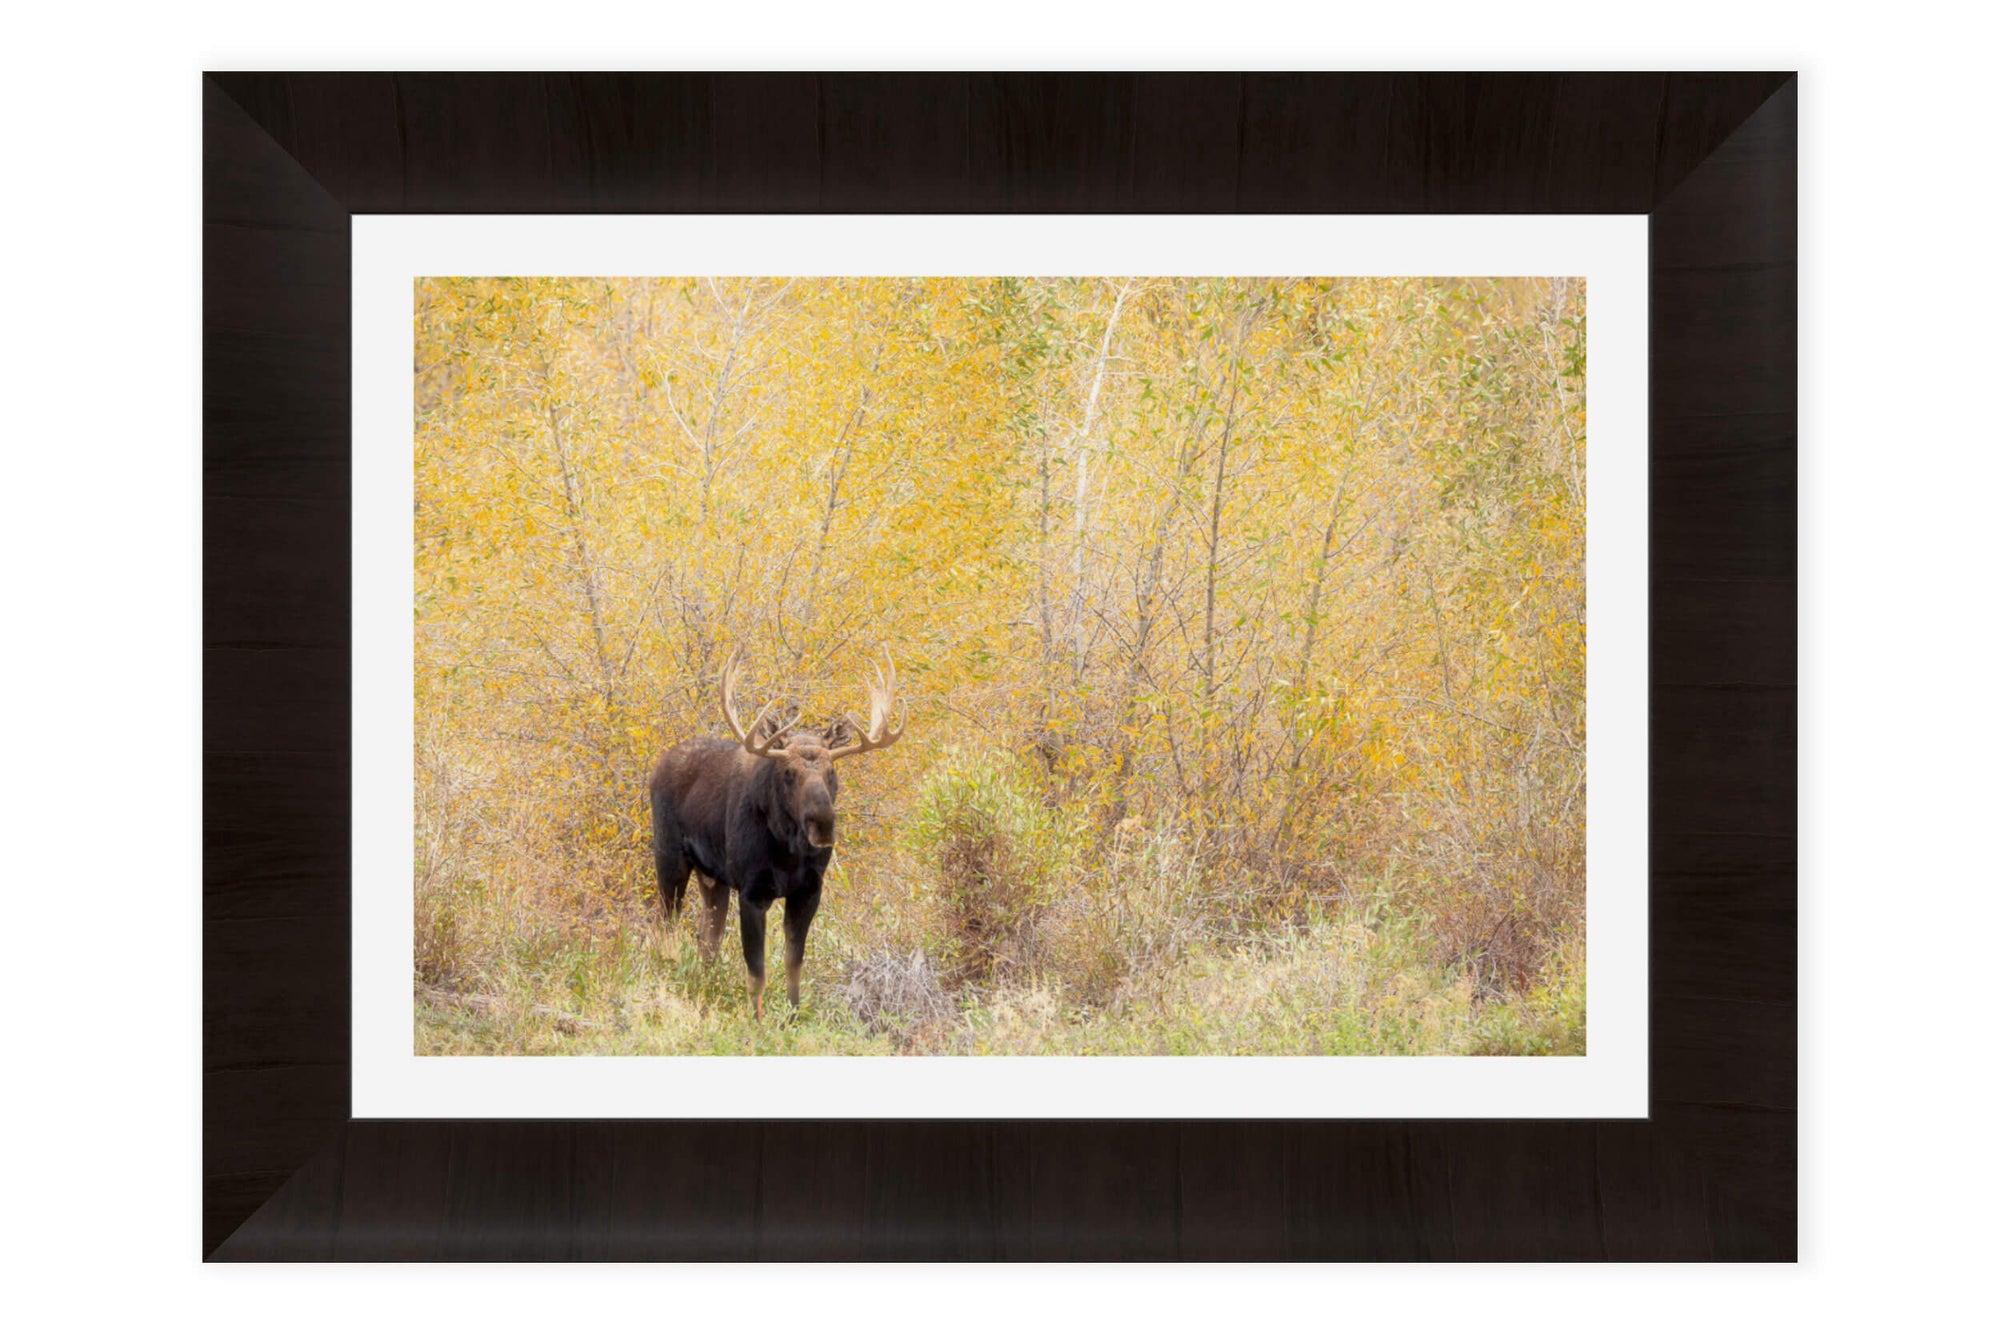 A framed picture of a moose during peak fall colors in Grand Teton National Park.